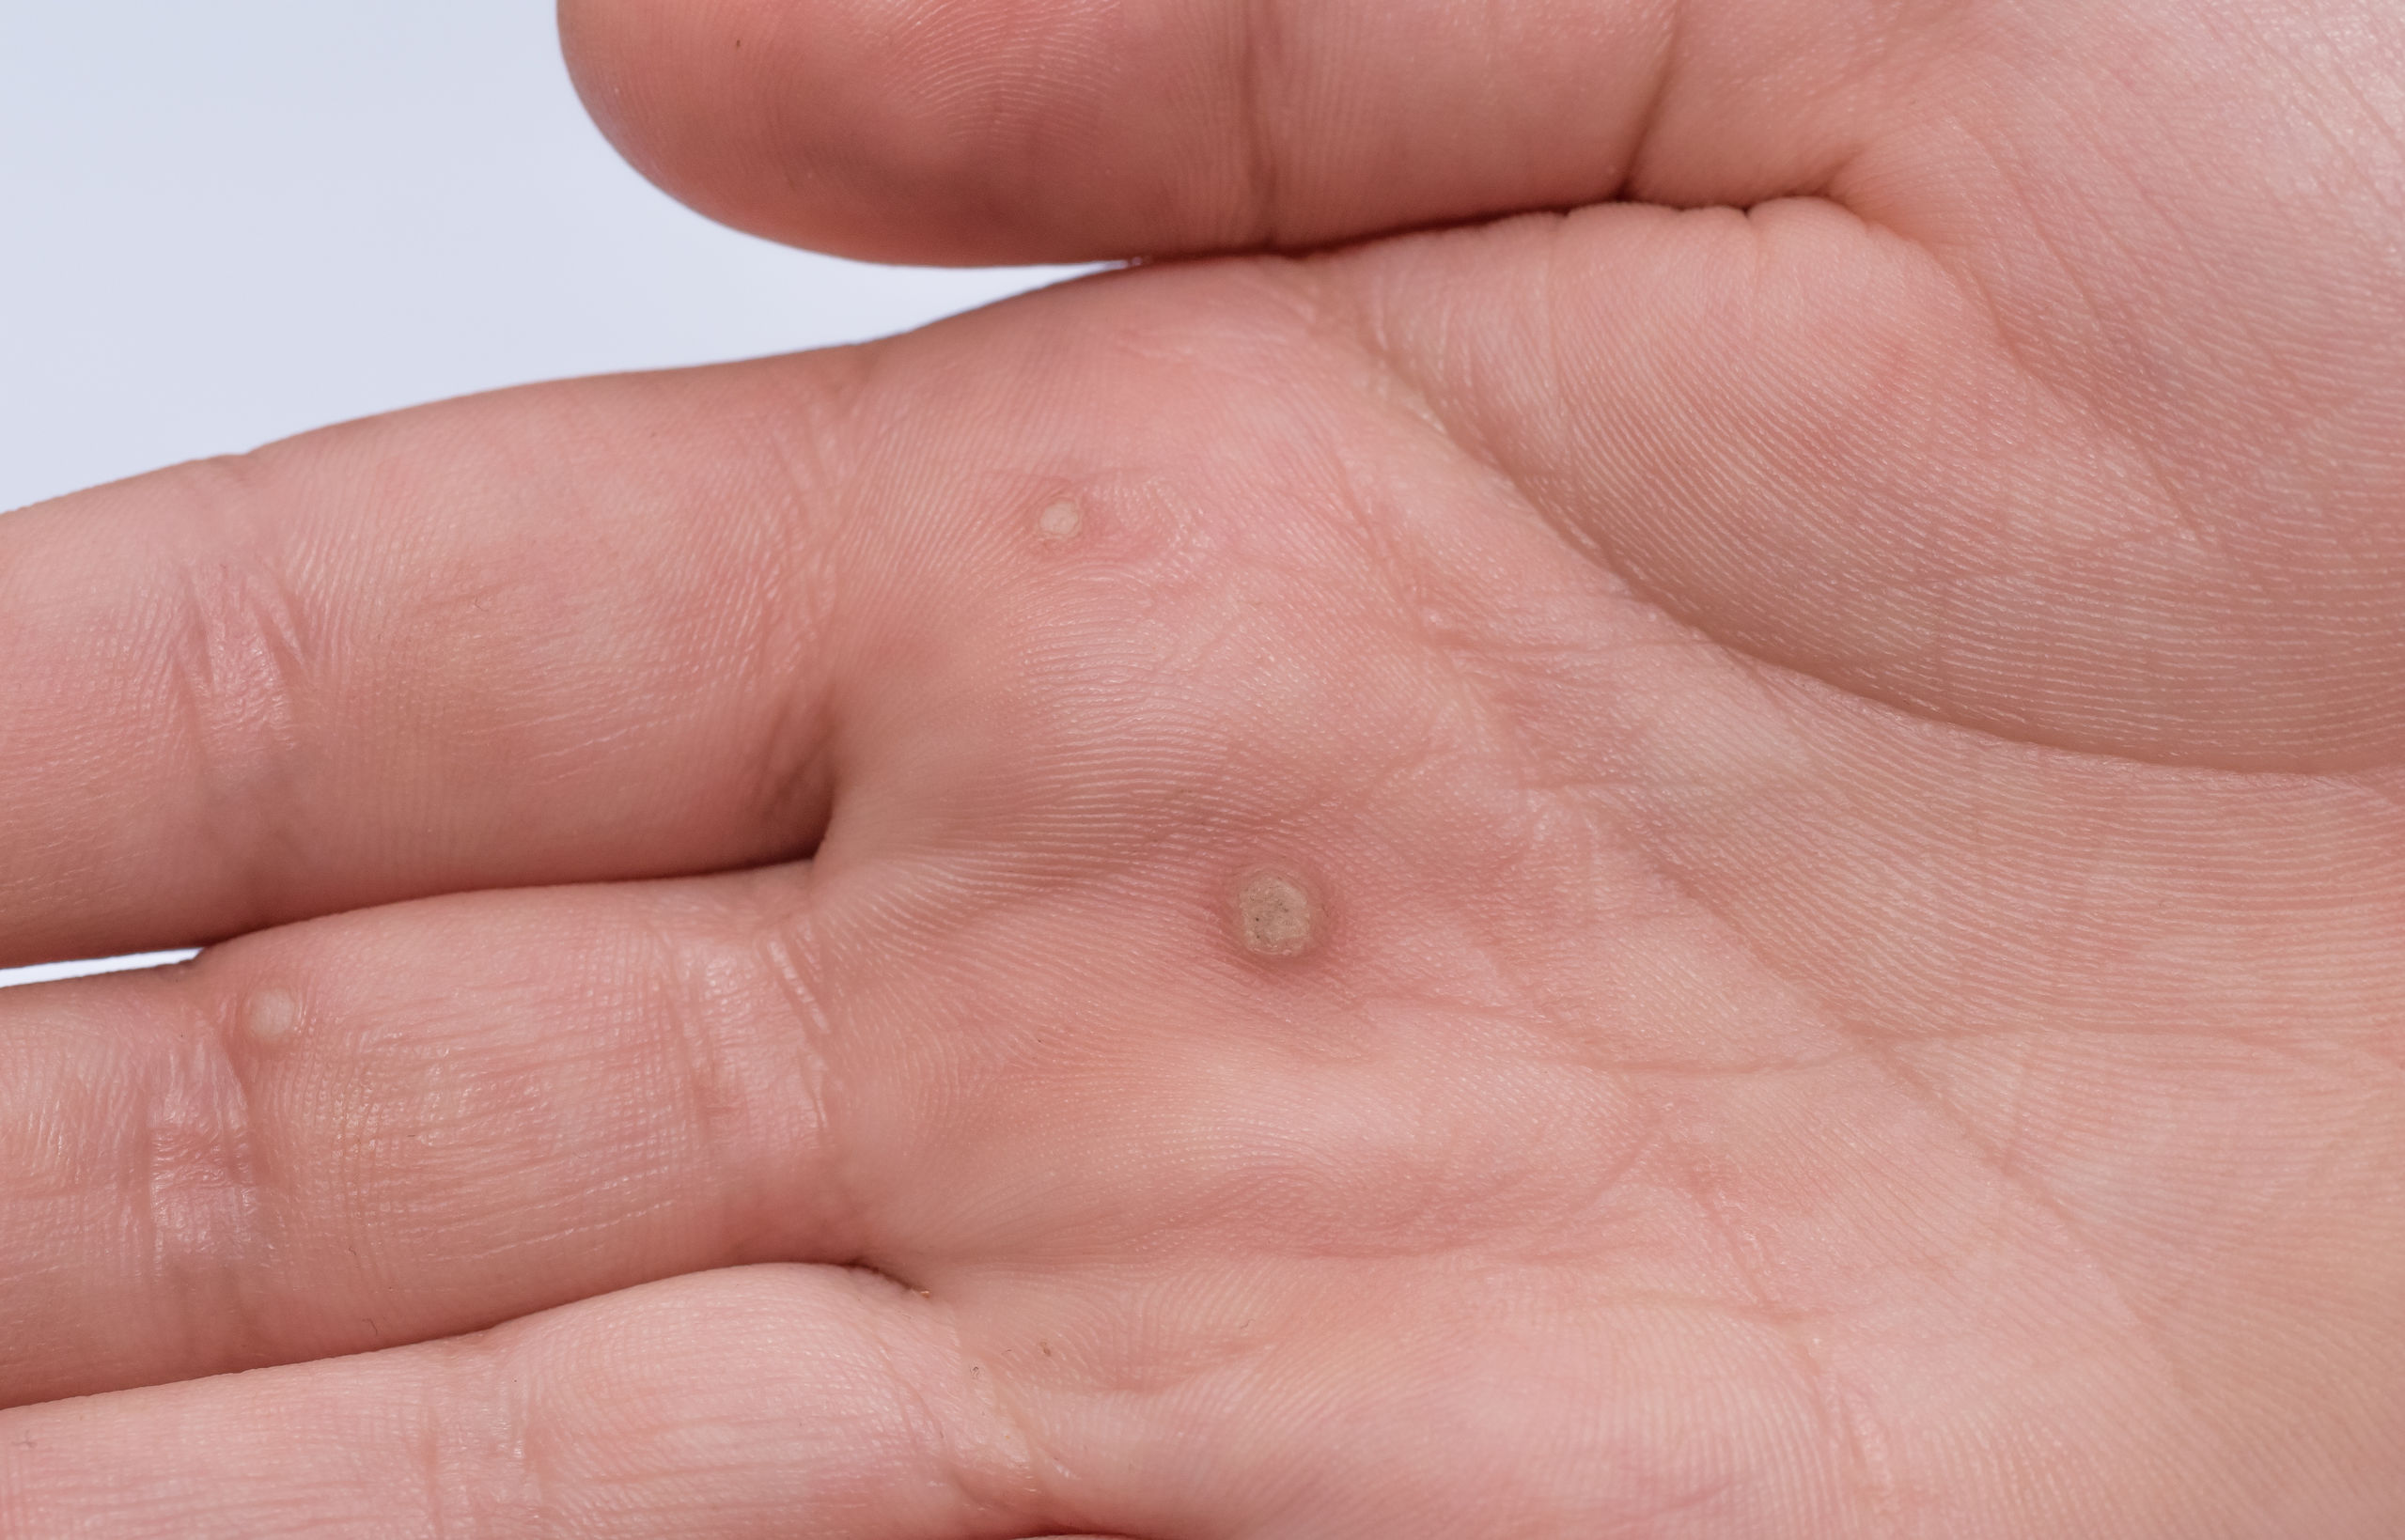 Warts on hands sexually transmitted, Wart on foot std